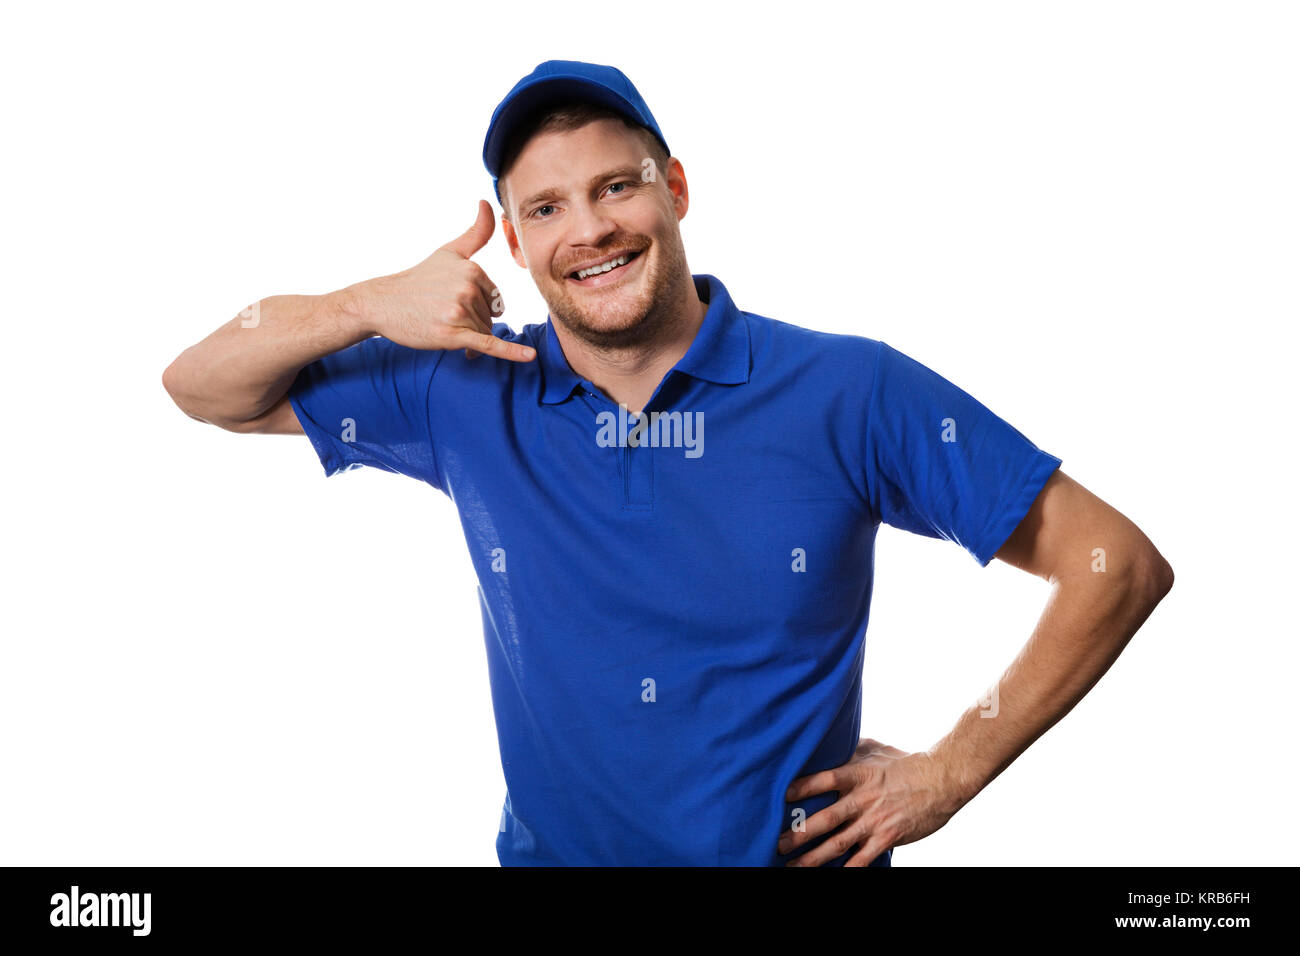 handyman services - worker in blue uniform making phone call gesture Stock Photo